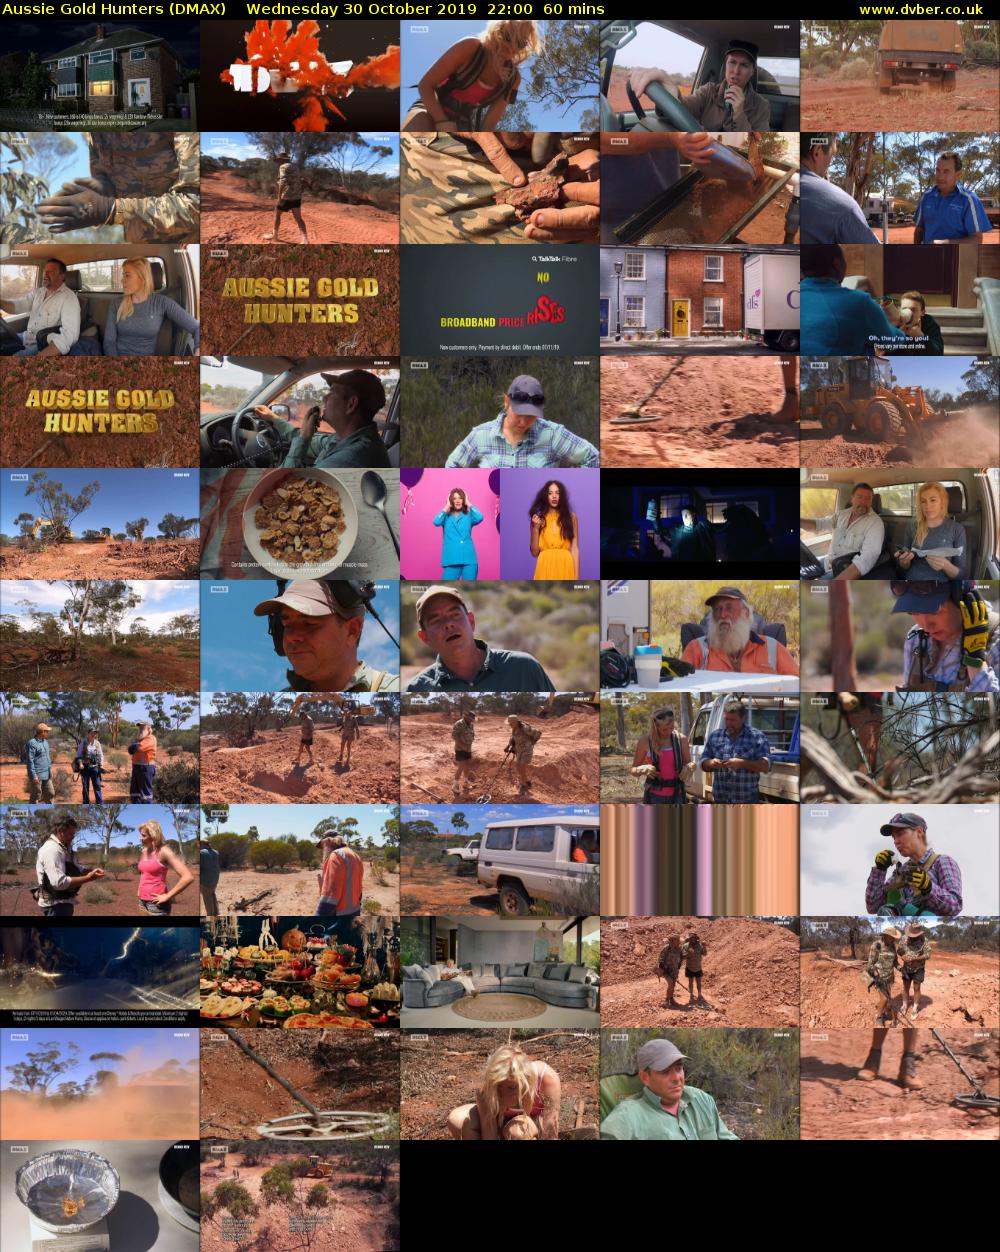 Aussie Gold Hunters (DMAX) Wednesday 30 October 2019 22:00 - 23:00